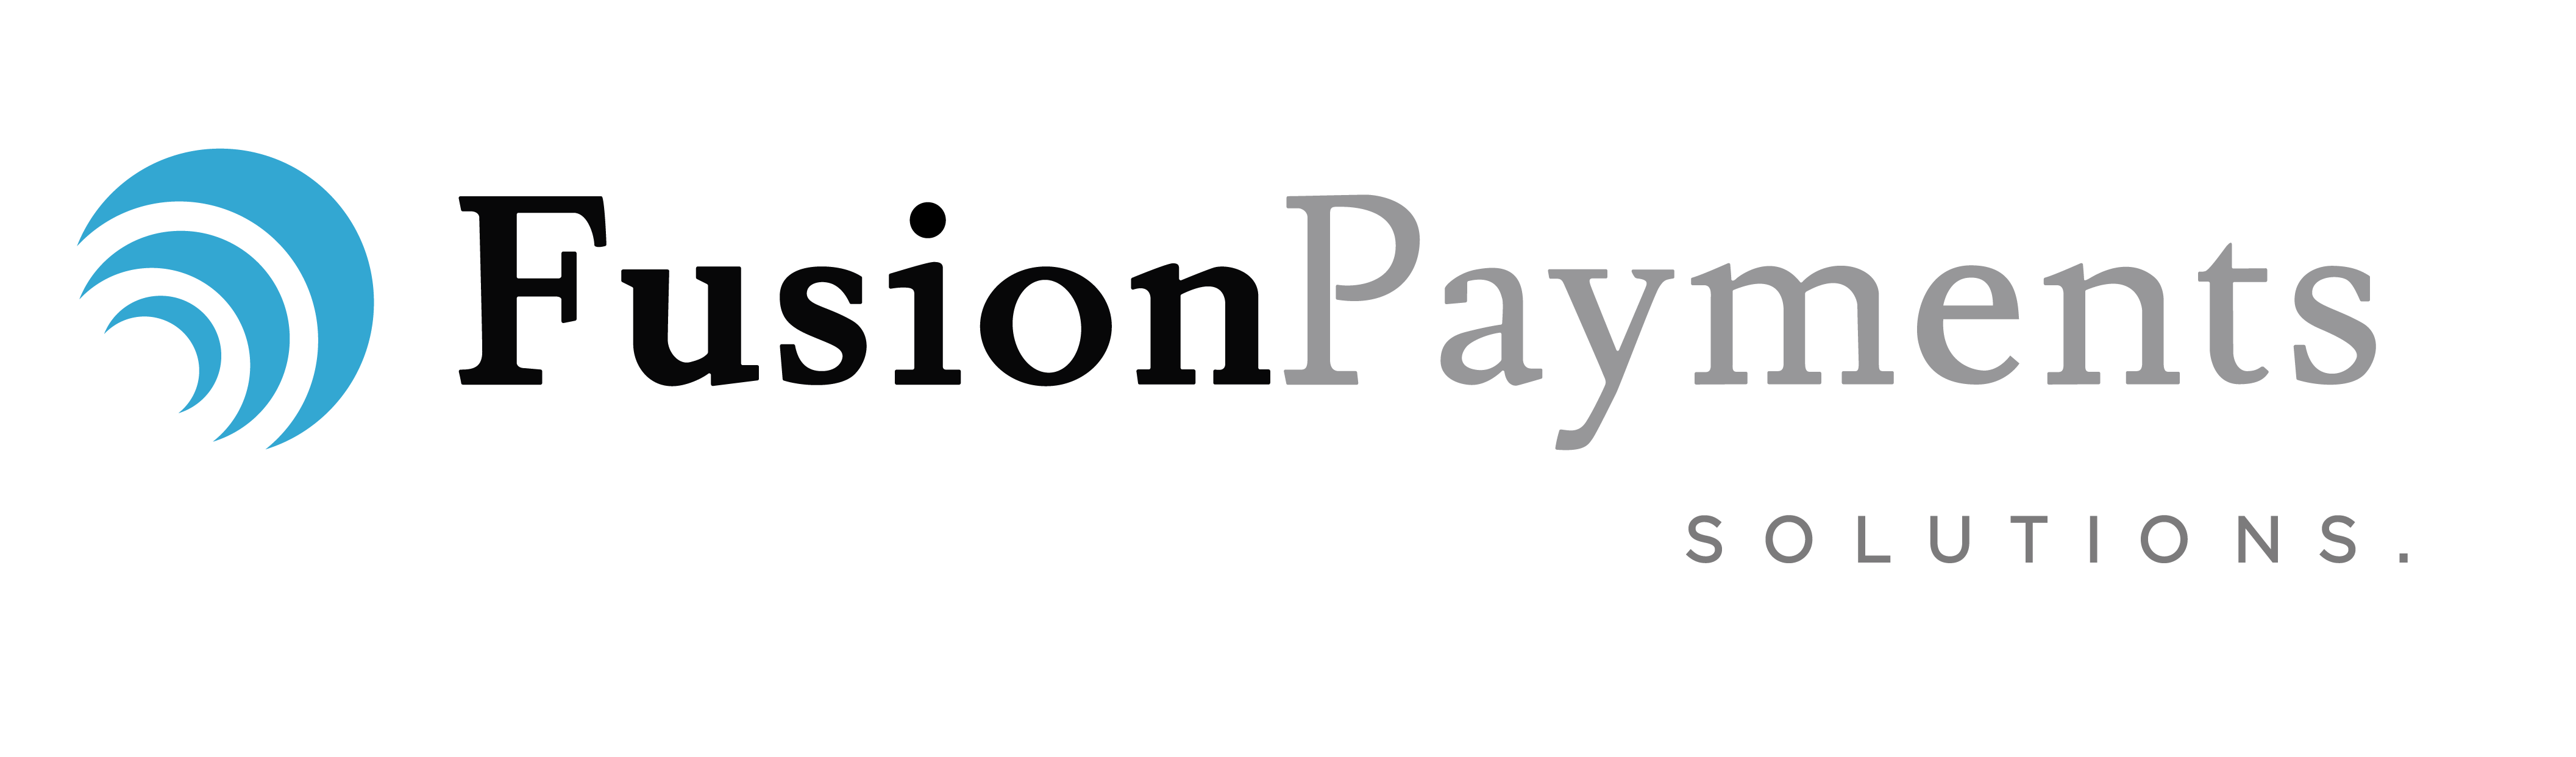 Fusion Payments Solutions